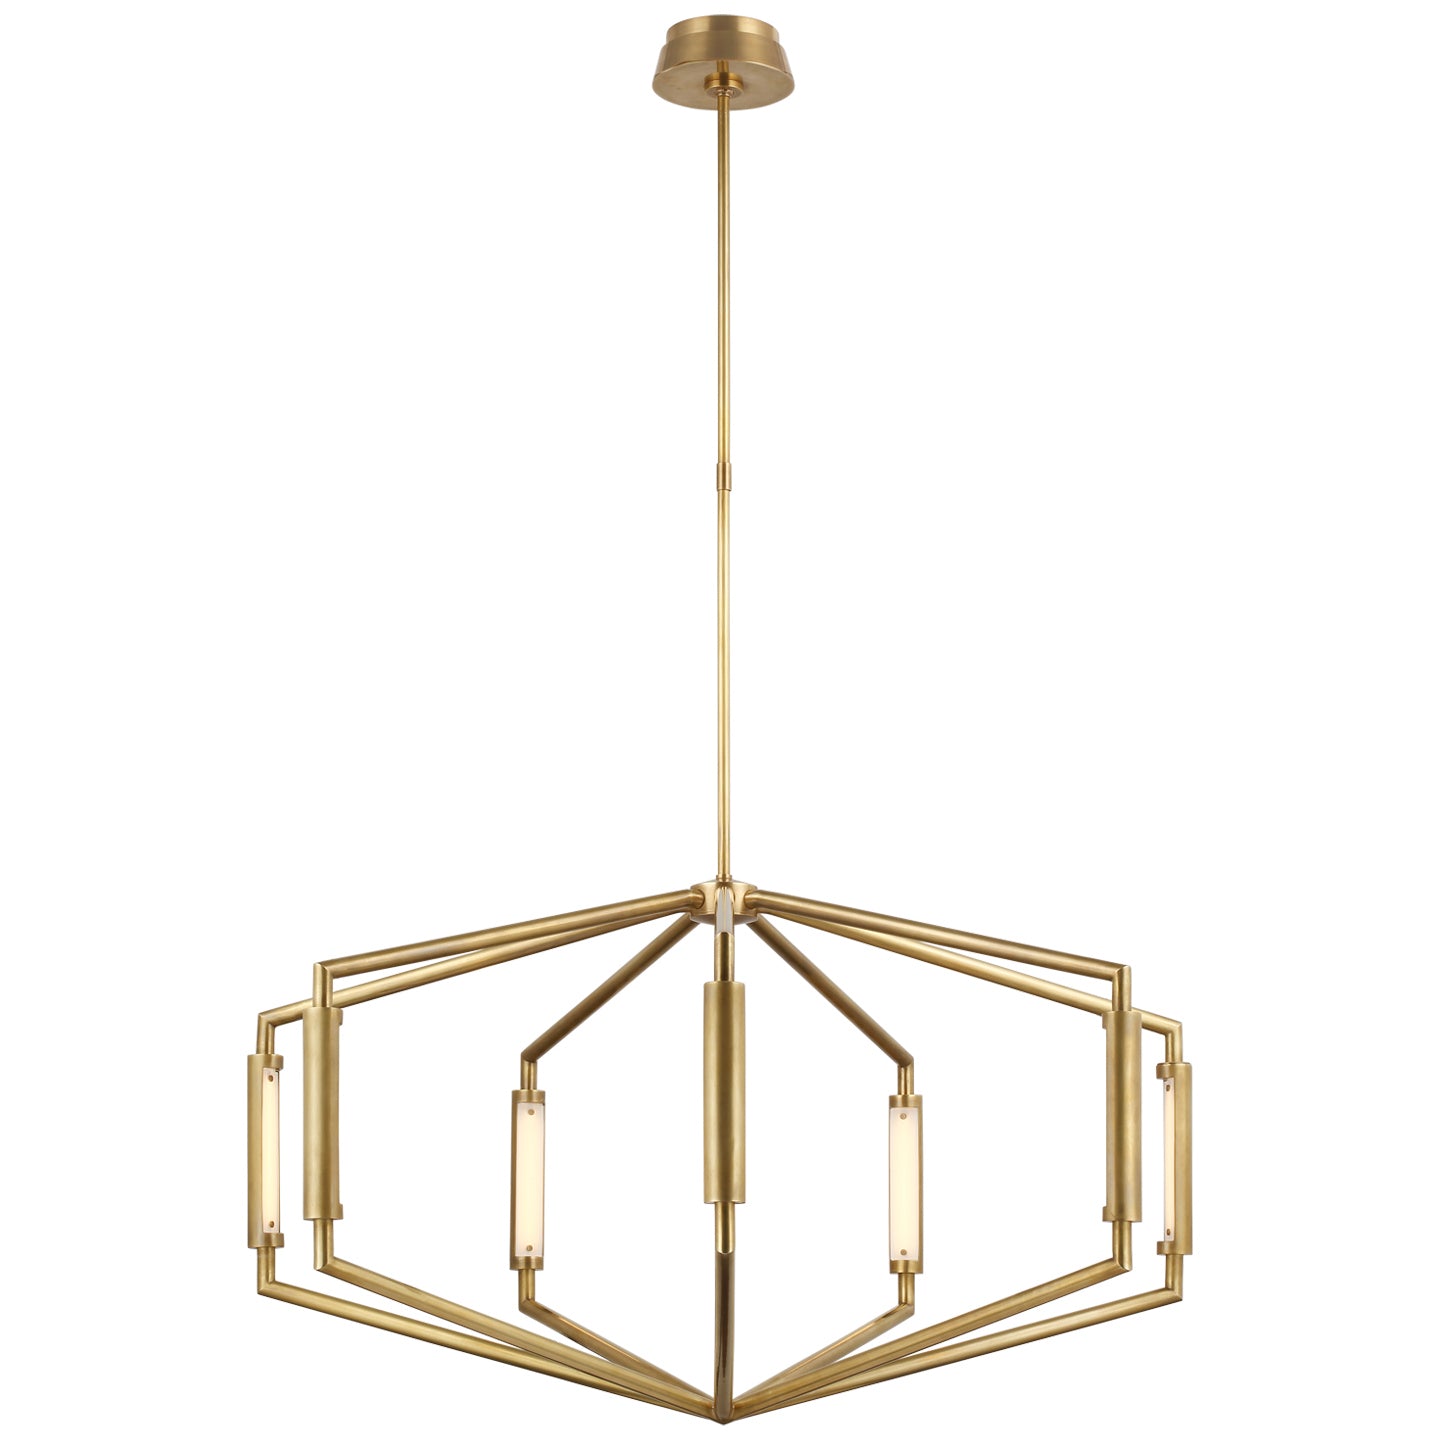 Load image into Gallery viewer, Visual Comfort Signature - KW 5707AB - LED Chandelier - Appareil - Antique-Burnished Brass
